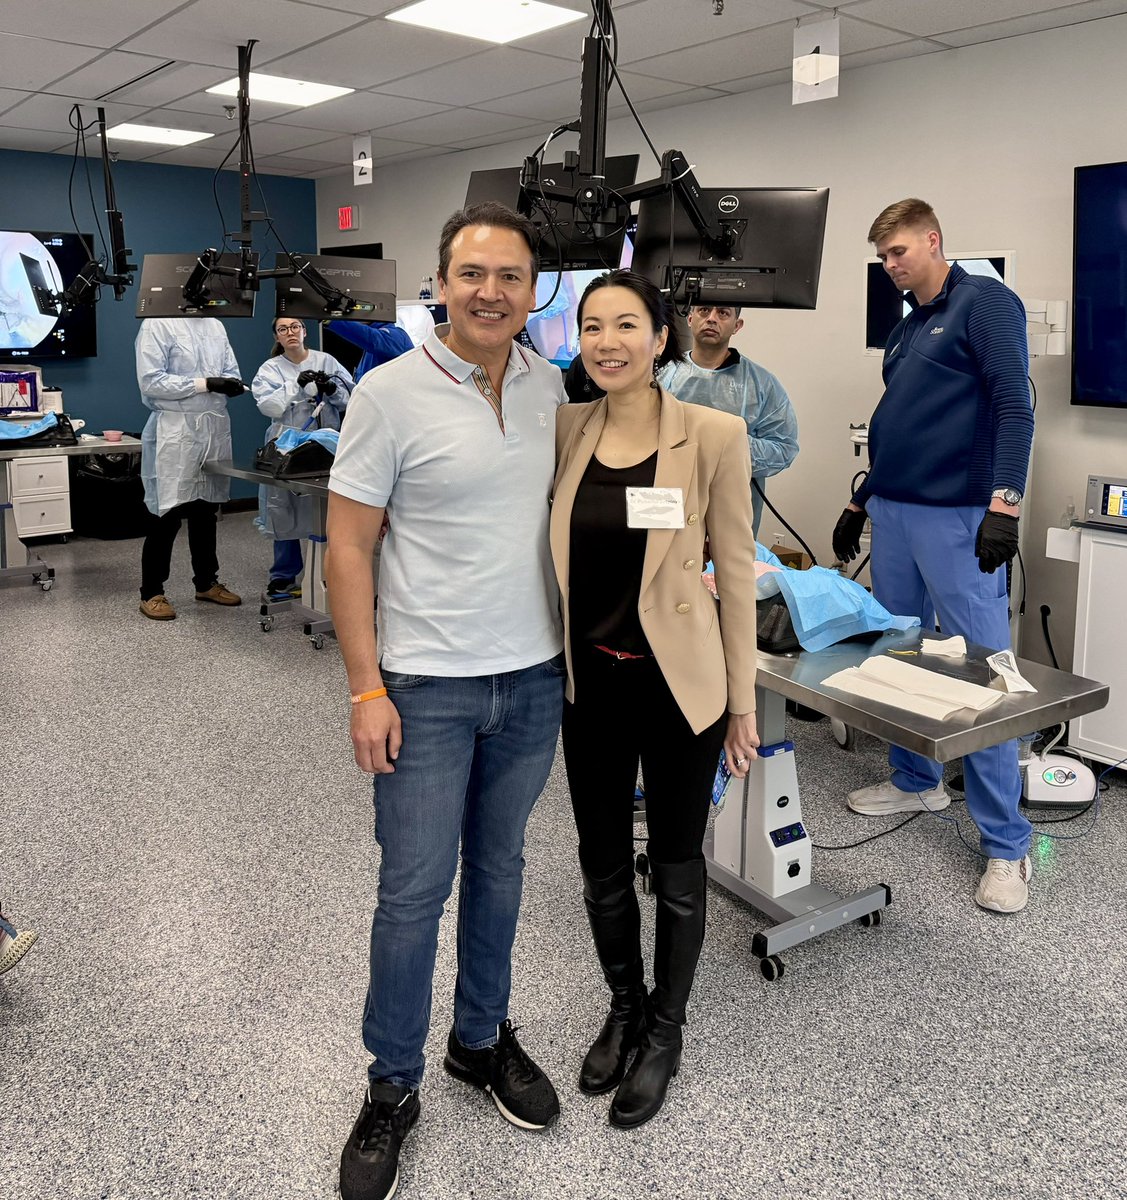 At EndoSim facility with @SighPichamol , an extraordinary faculty for this amazing course! #ESG #TORe Endoscopic Sleeve and Revisions, Incision-less procedures! Thank you @bostonsci for another wonderful training! #Endosurgery #Some4surgery @igsjc @orlandohealth @IntuitiveSurg